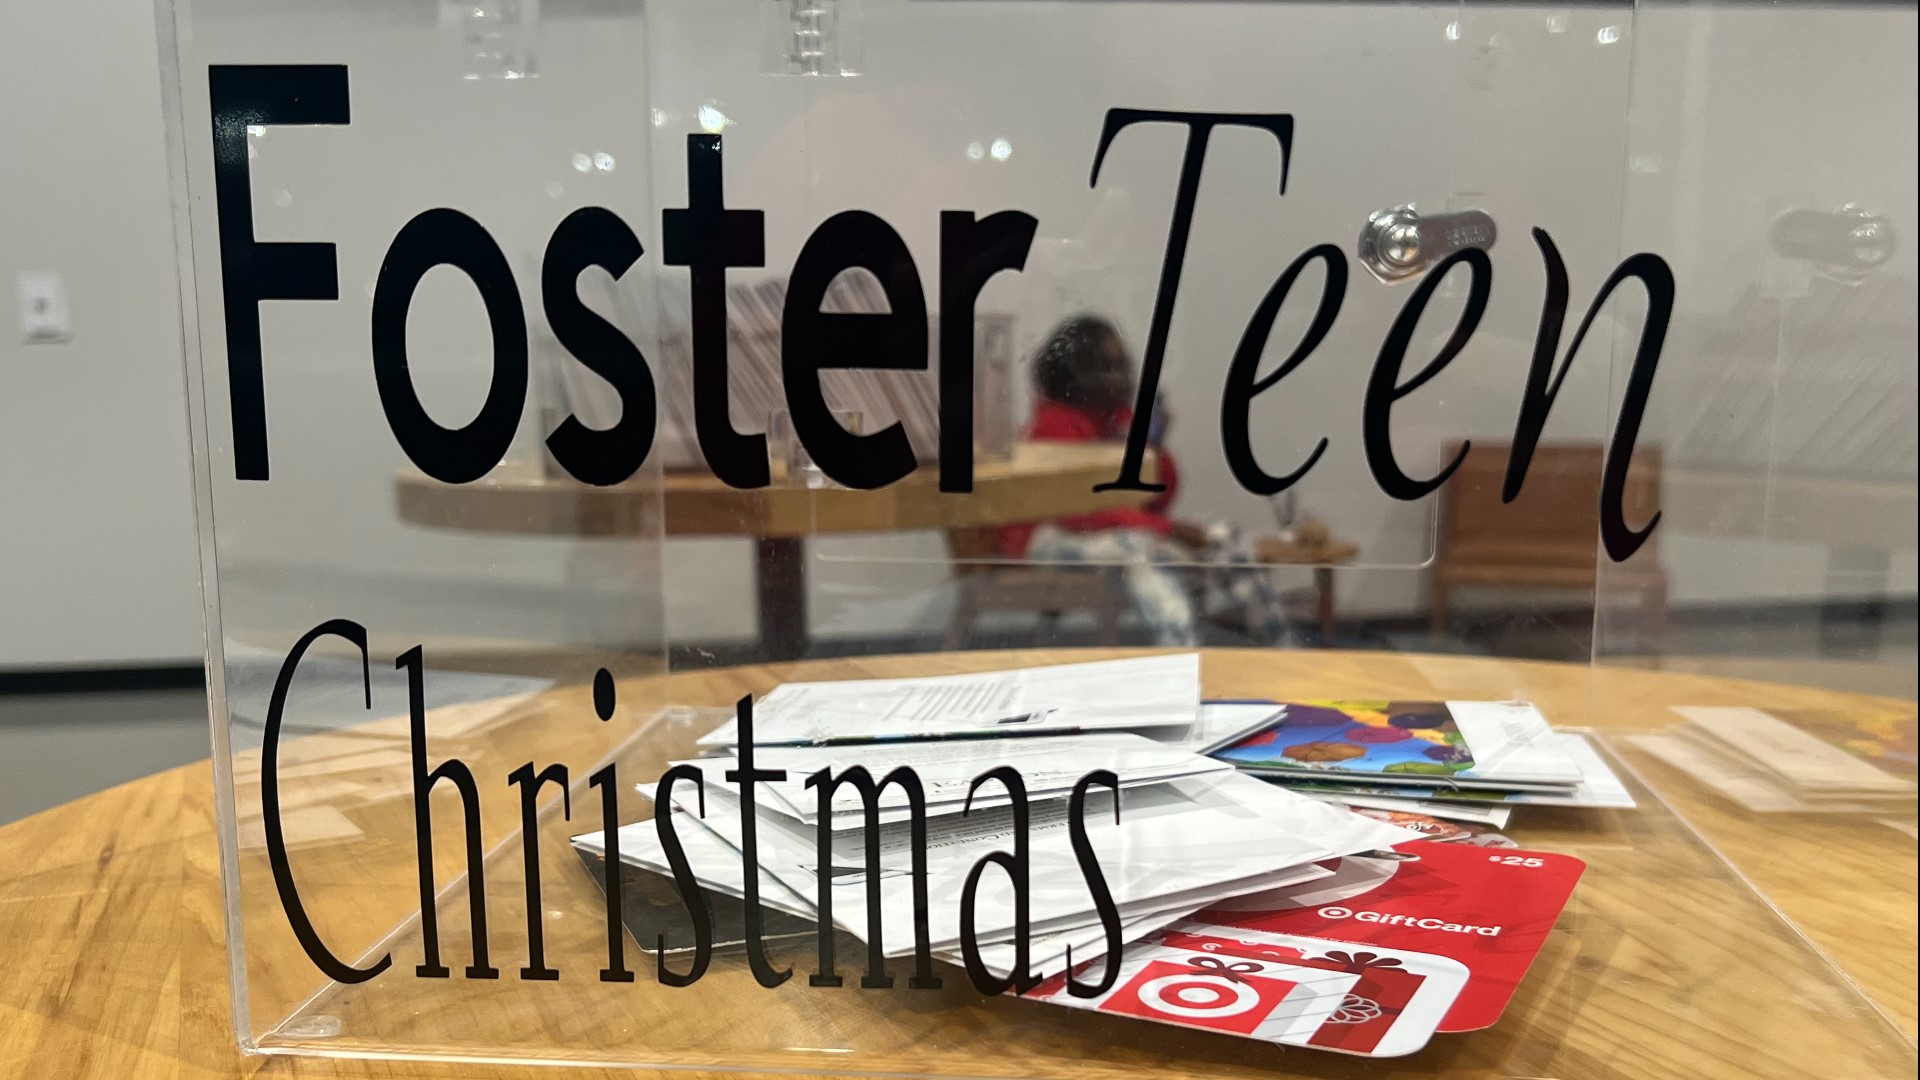 Local organizations are on a mission to raise thousands of dollars to provide gift cards to every foster teen in Ohio.